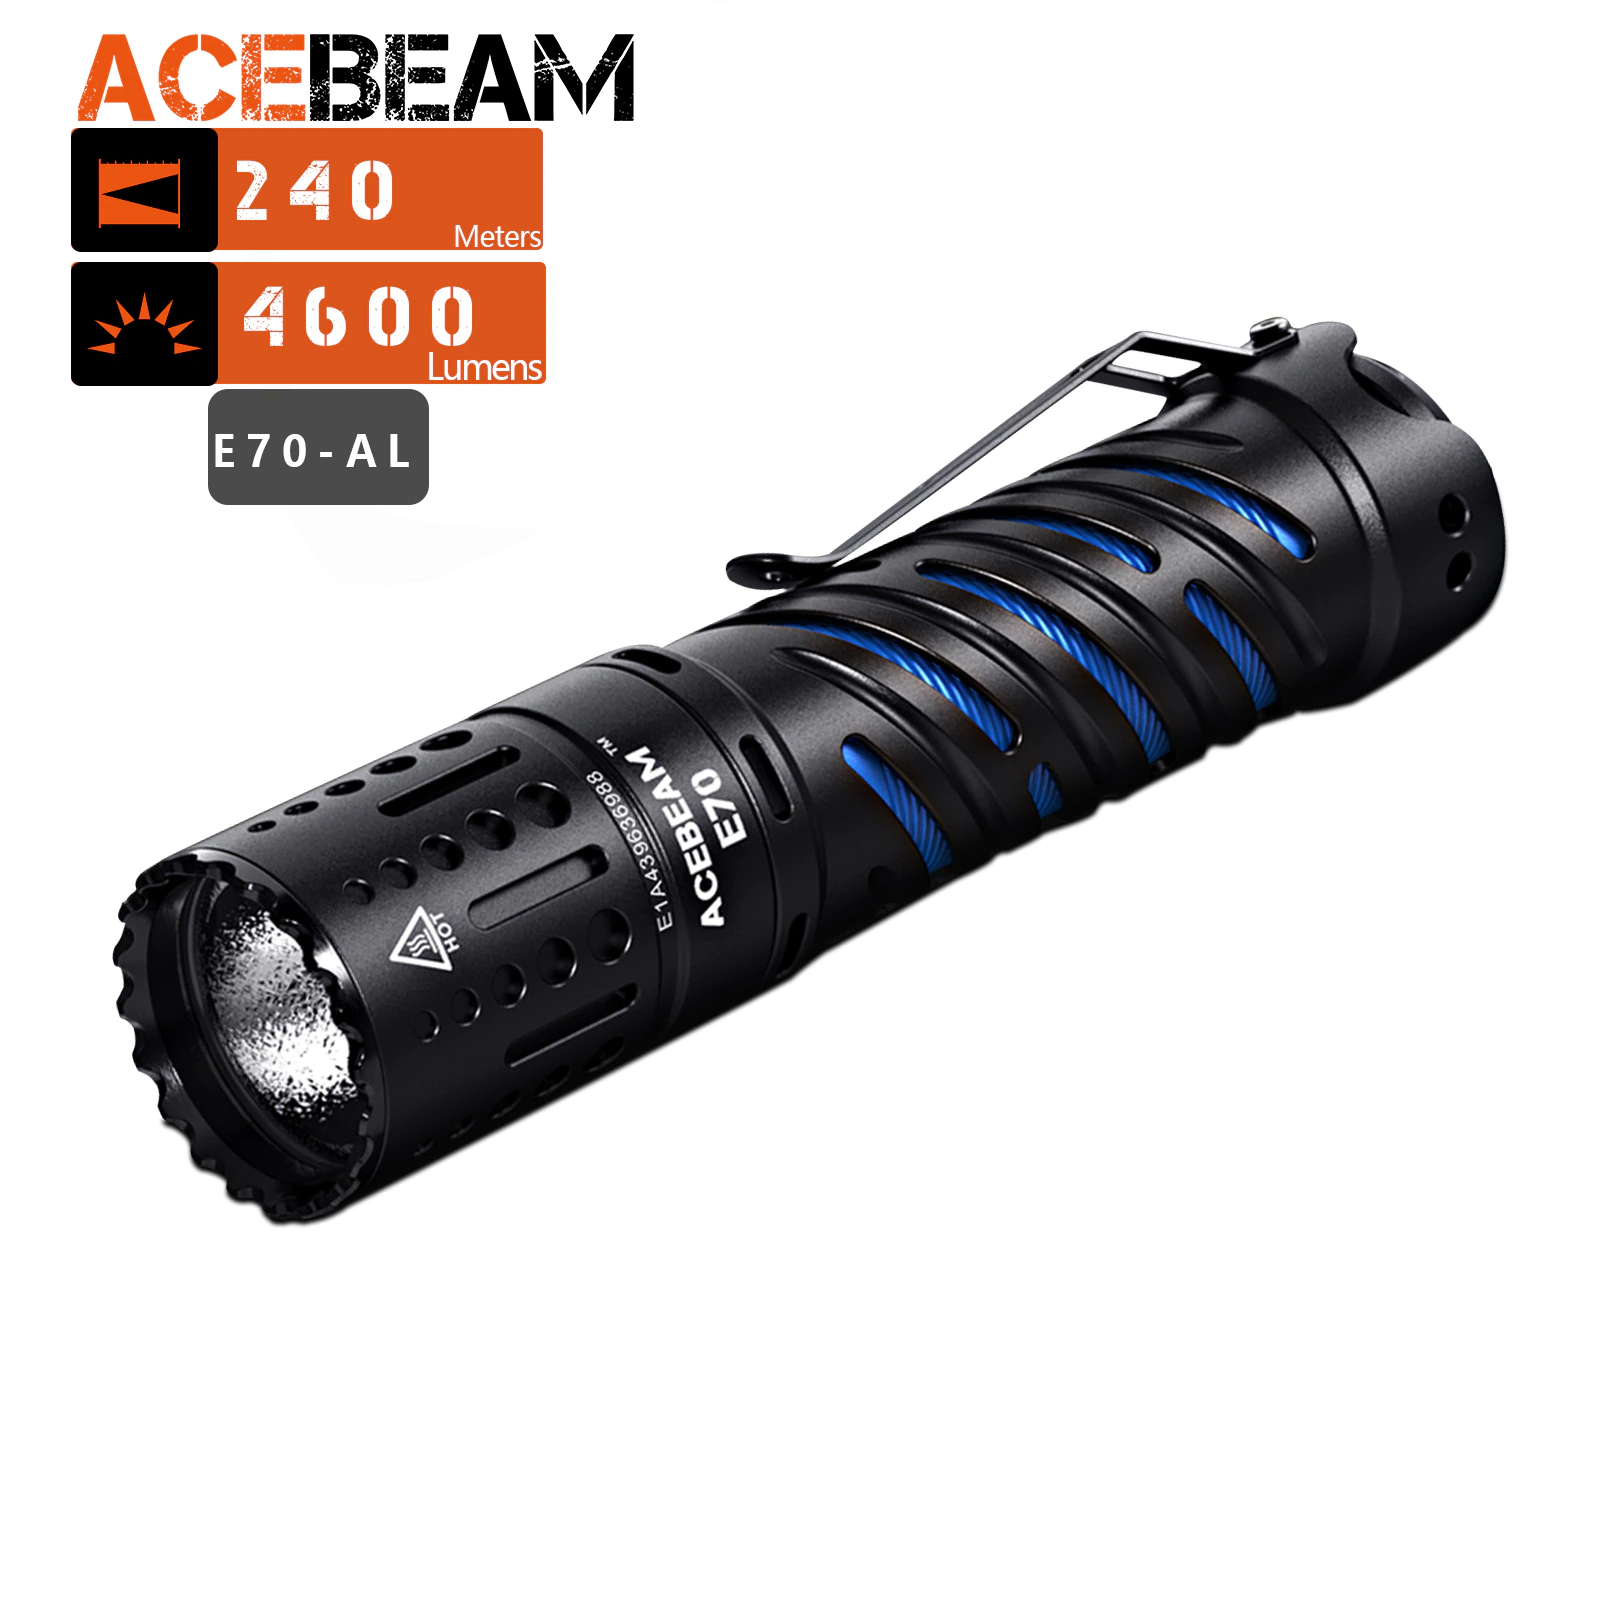 ACEBEAM E70 4600 Lumens Ultra-Compact Rechargeable EDC Flashlight, for Household Search, Outdoor Camping, Hiking post thumbnail image